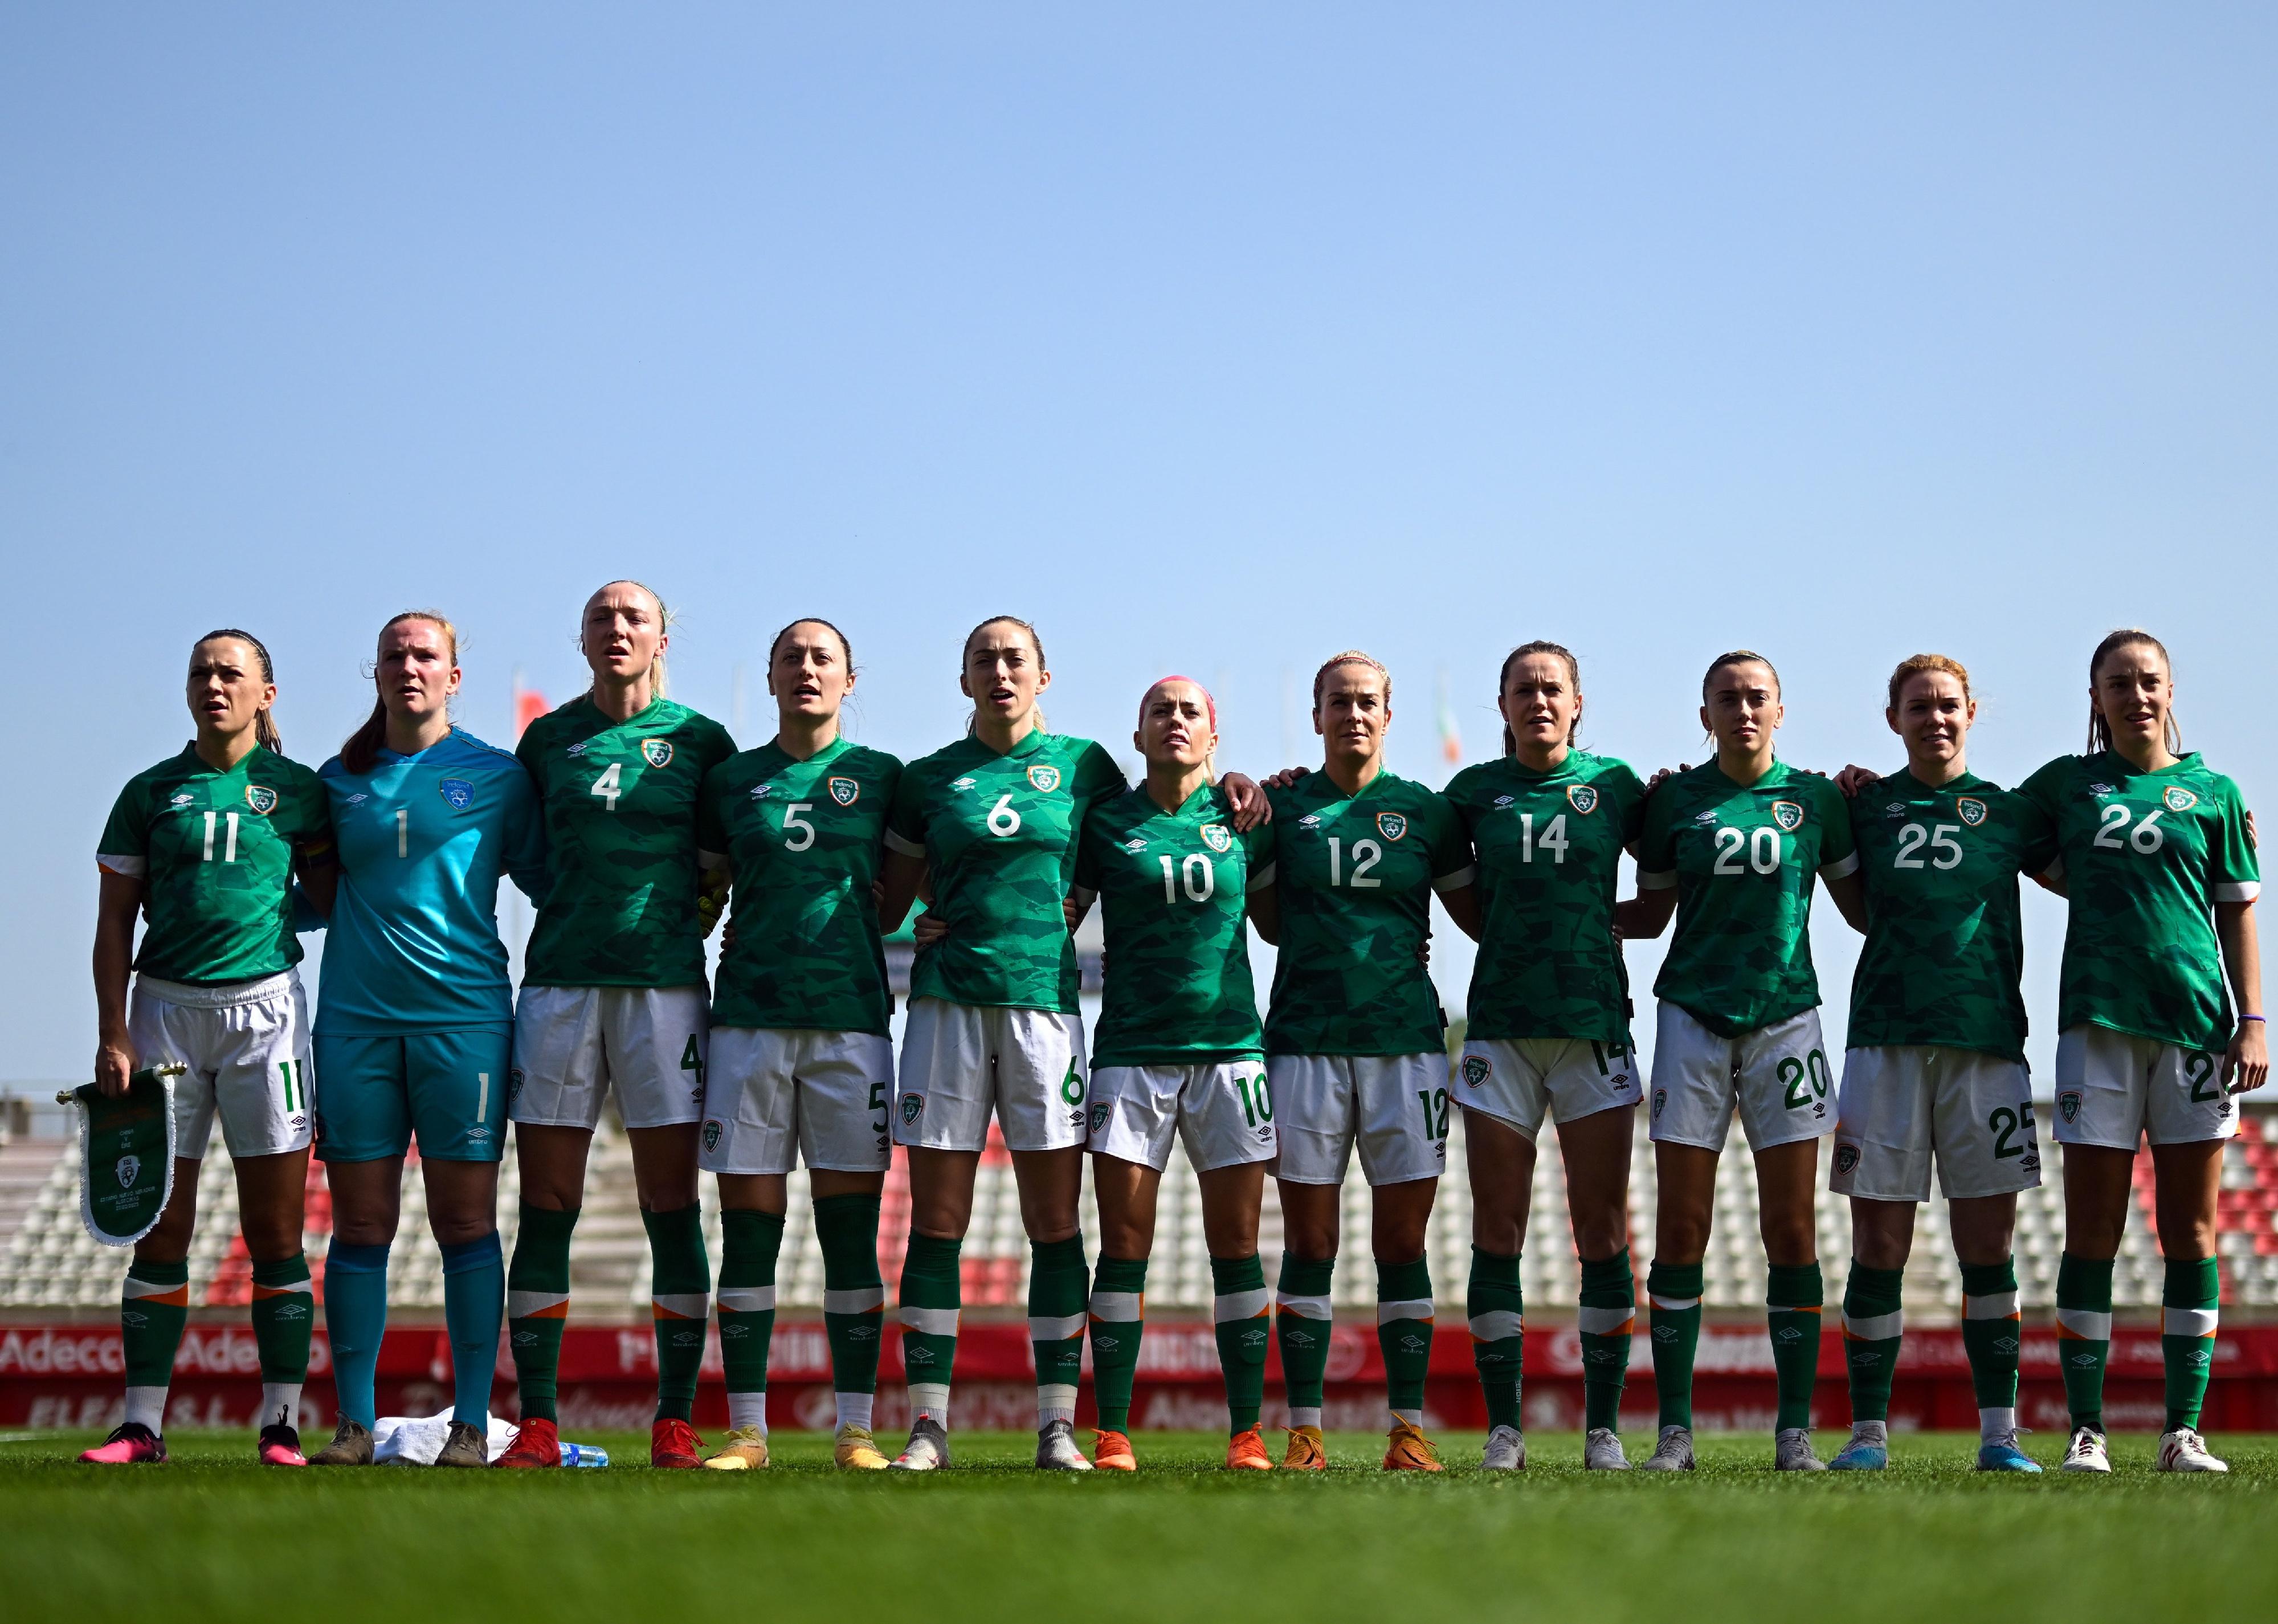 Republic of Ireland players during the national anthem before the international friendly match between China PR and Republic of Ireland.